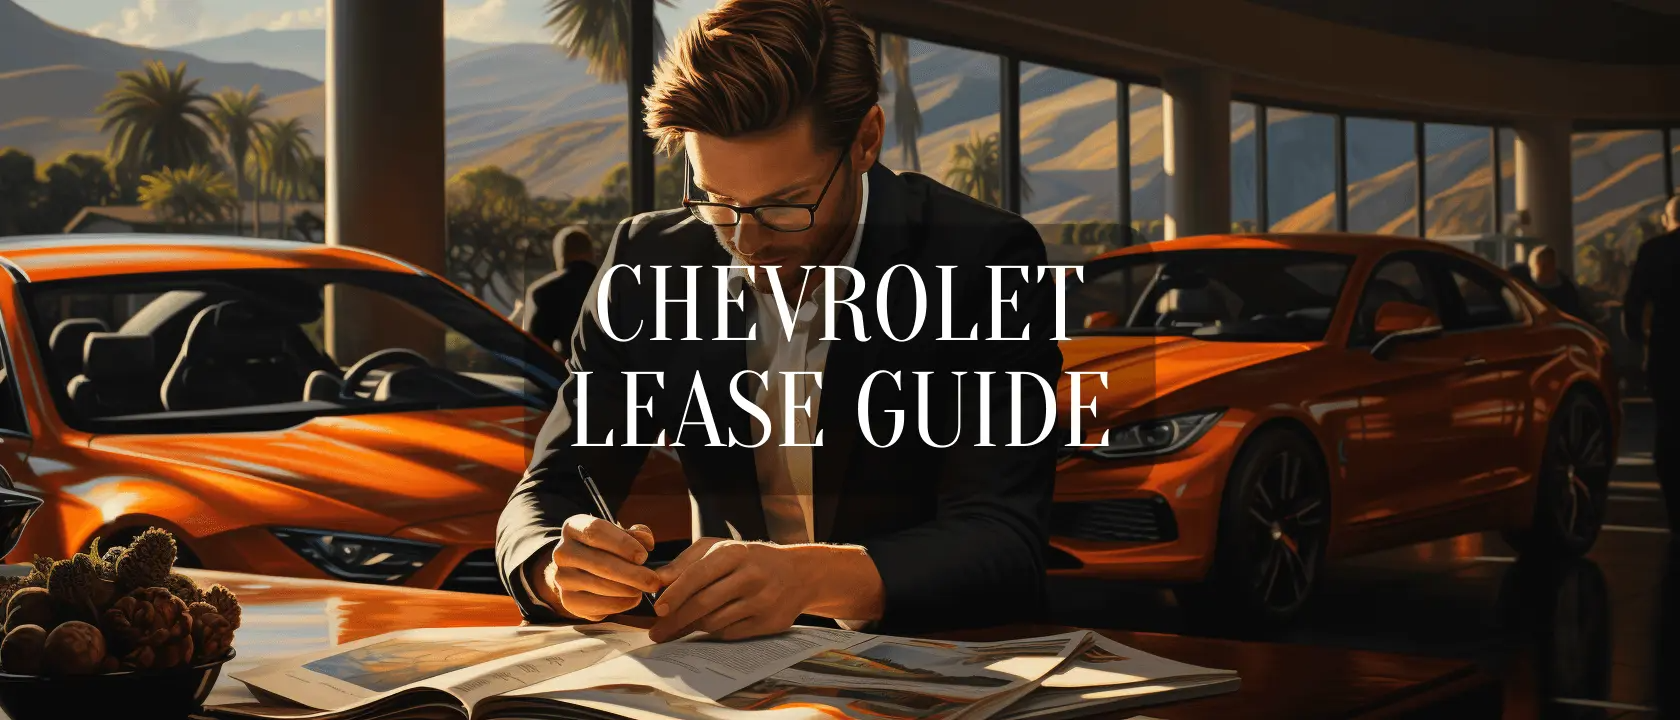 Lease Guide